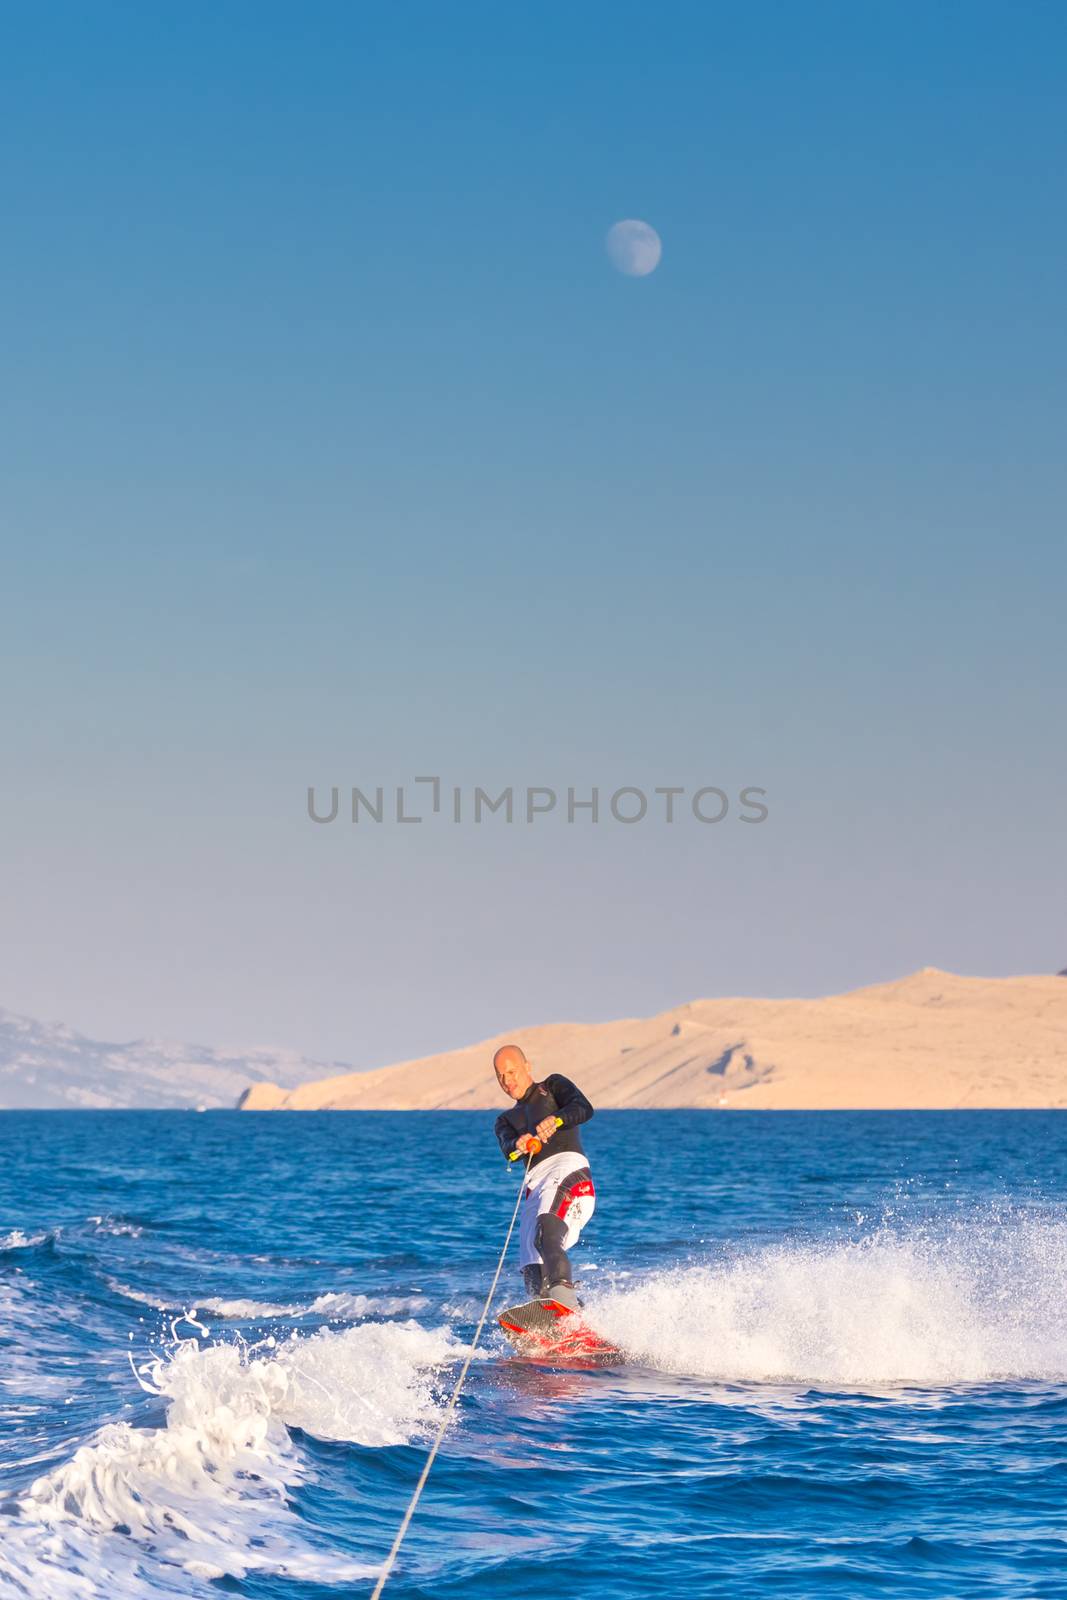 Wakeboarder in wetsuit riding in sunset. Wakeboarding is a surface water sport which involves riding a wakeboard over the surface of a body of water.